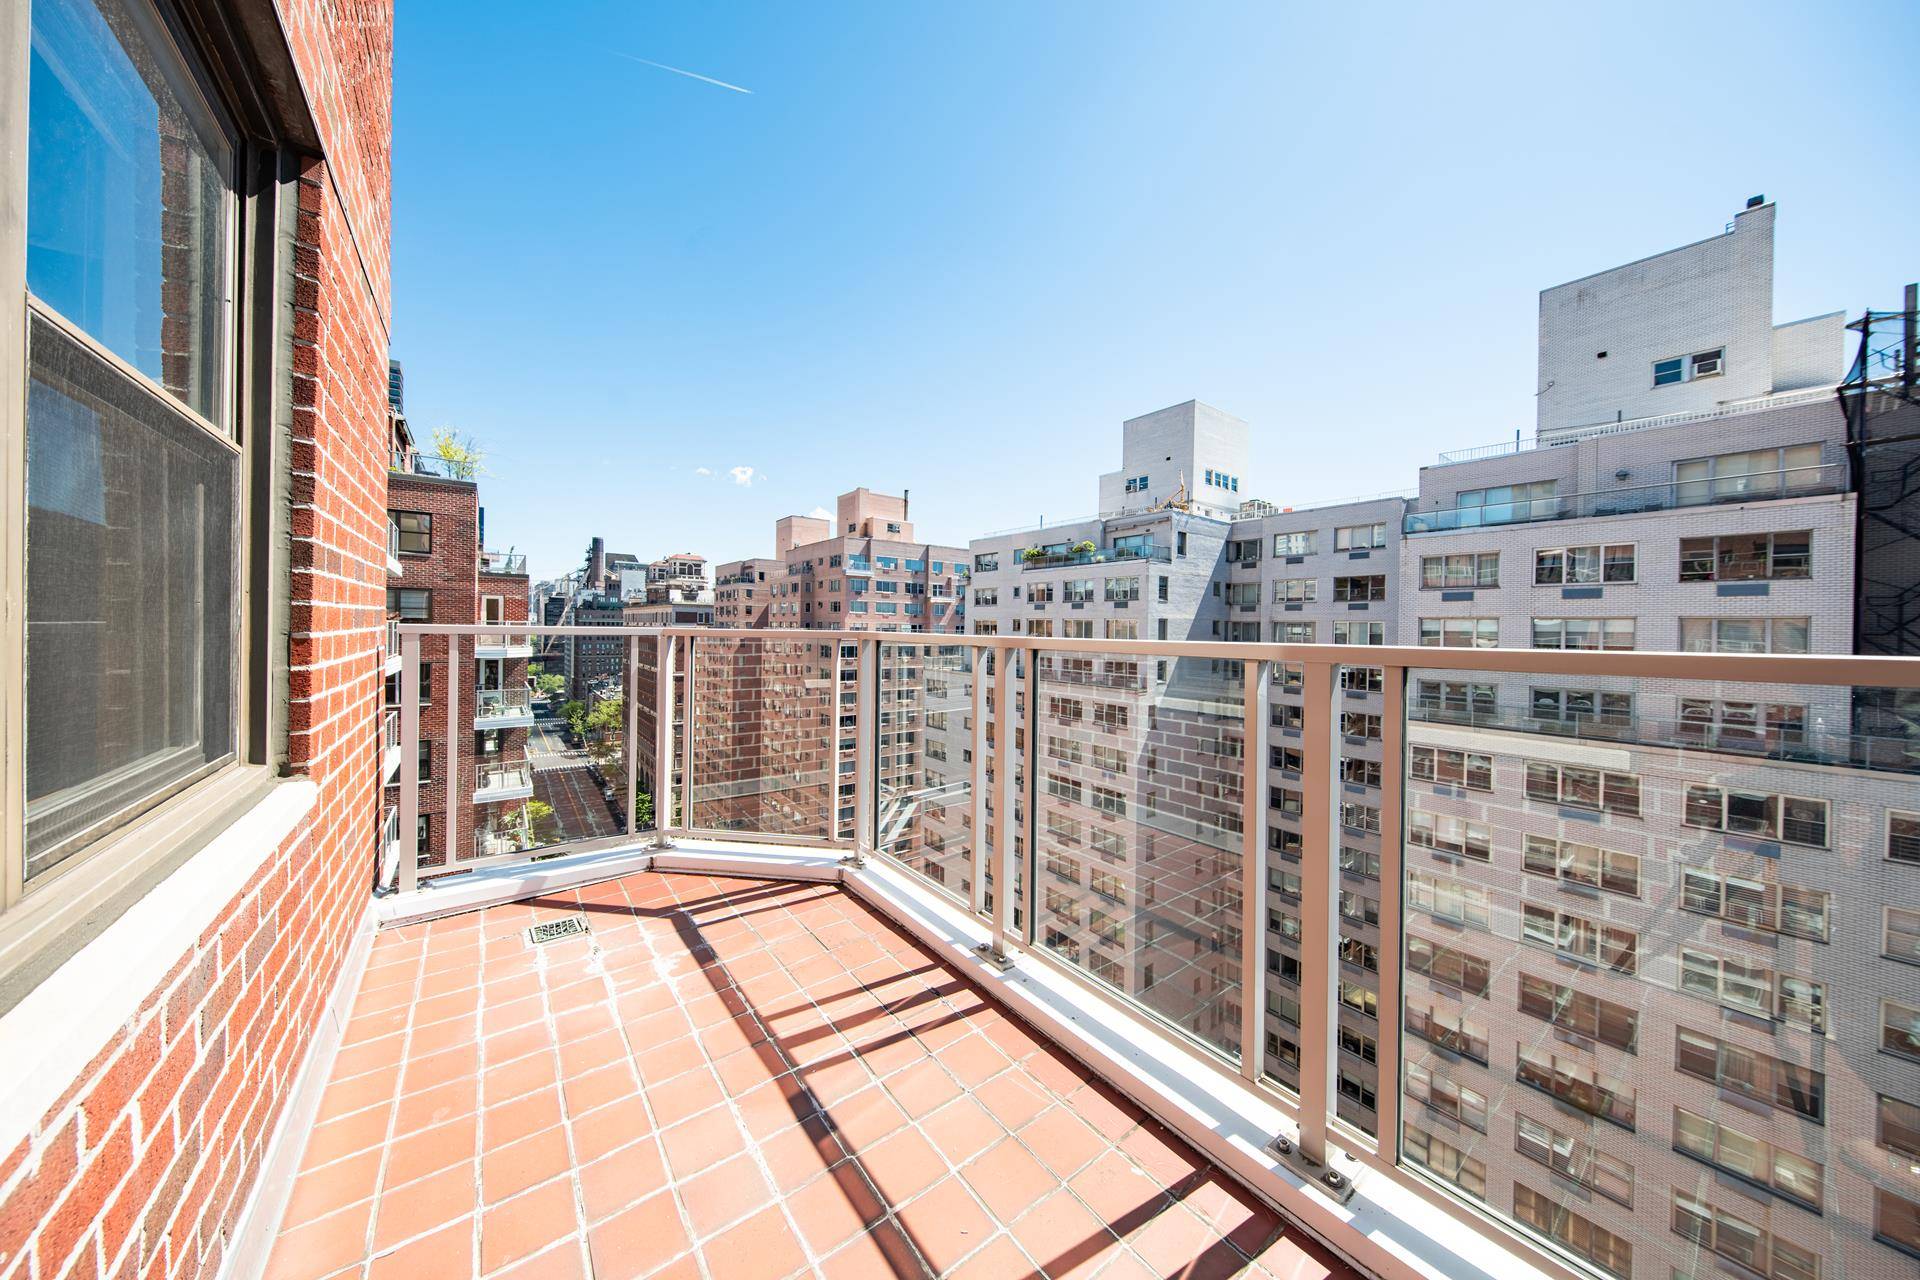 Enjoy the SUNSHINE and RIVER VIEWS from this high floor, highly desirable 4 room, 1 bedroom home fexible 2 bedroom with direct river views and expansive Eastern and Southern exposures.